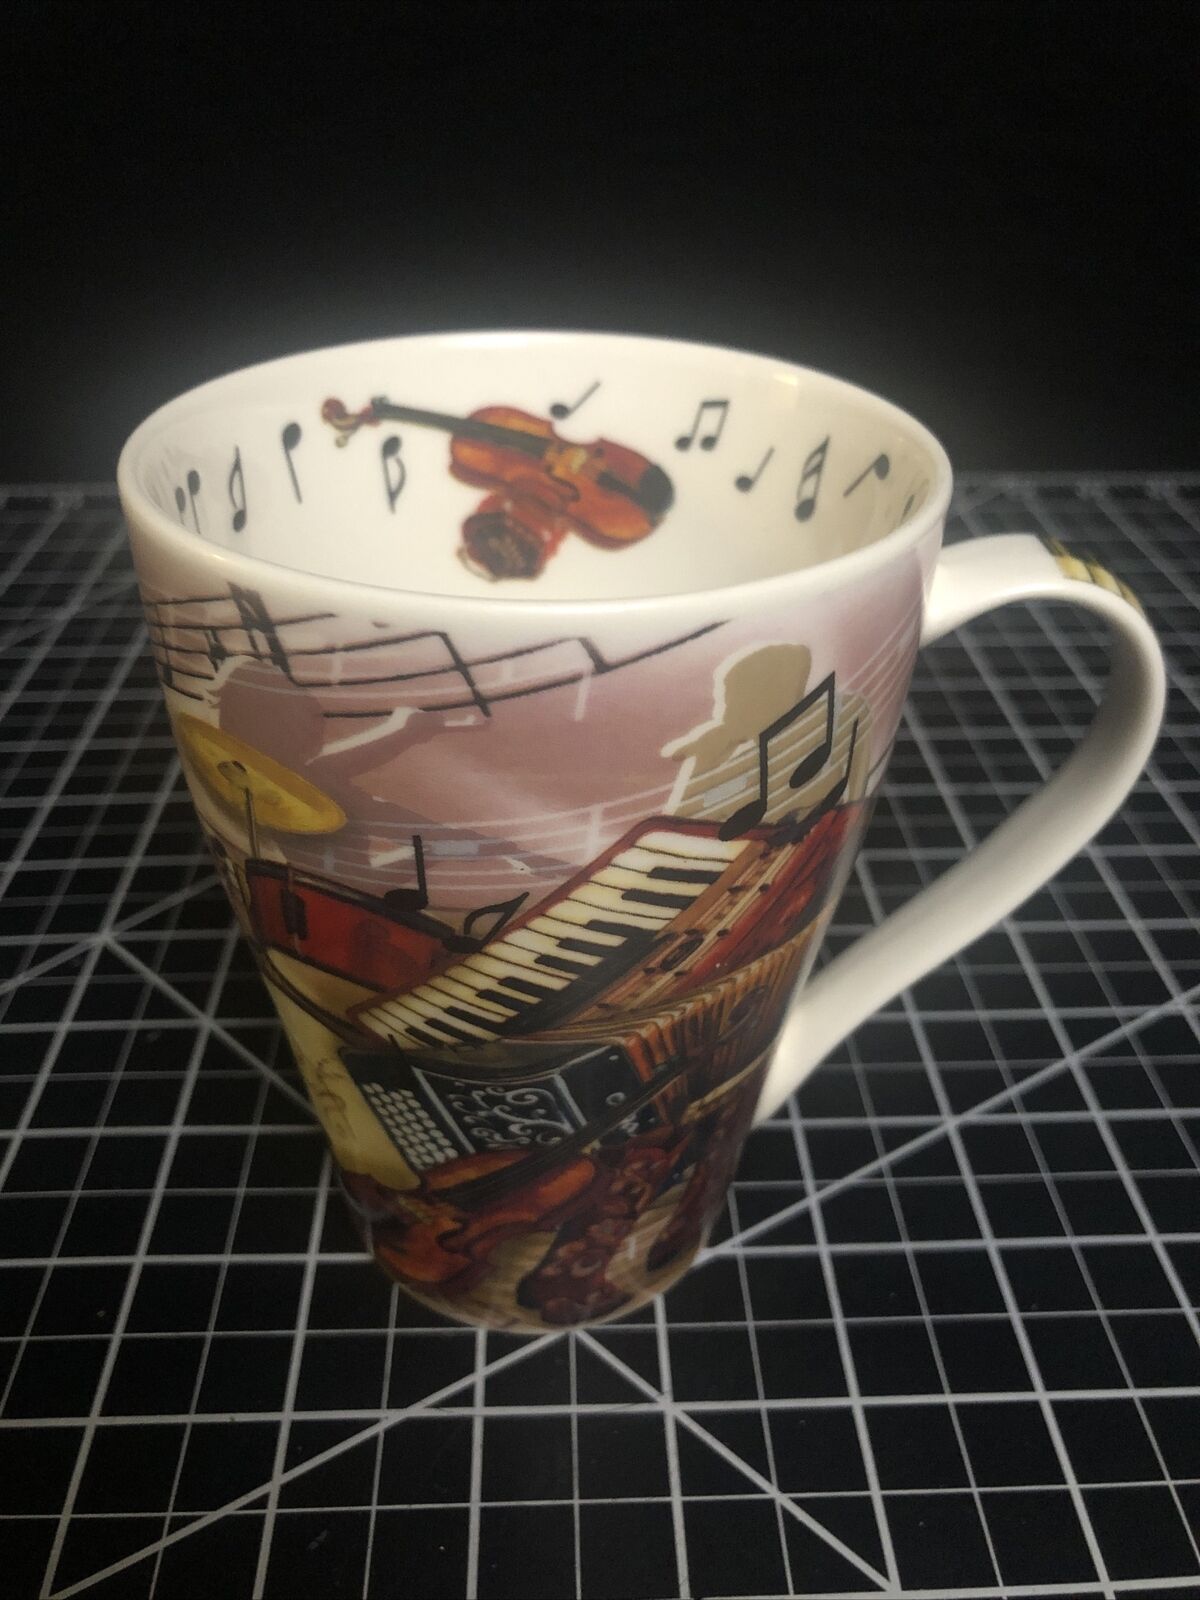 2013 Country & Blues Music Tall Mug by Cardew Designed in England Cowboy Guitar